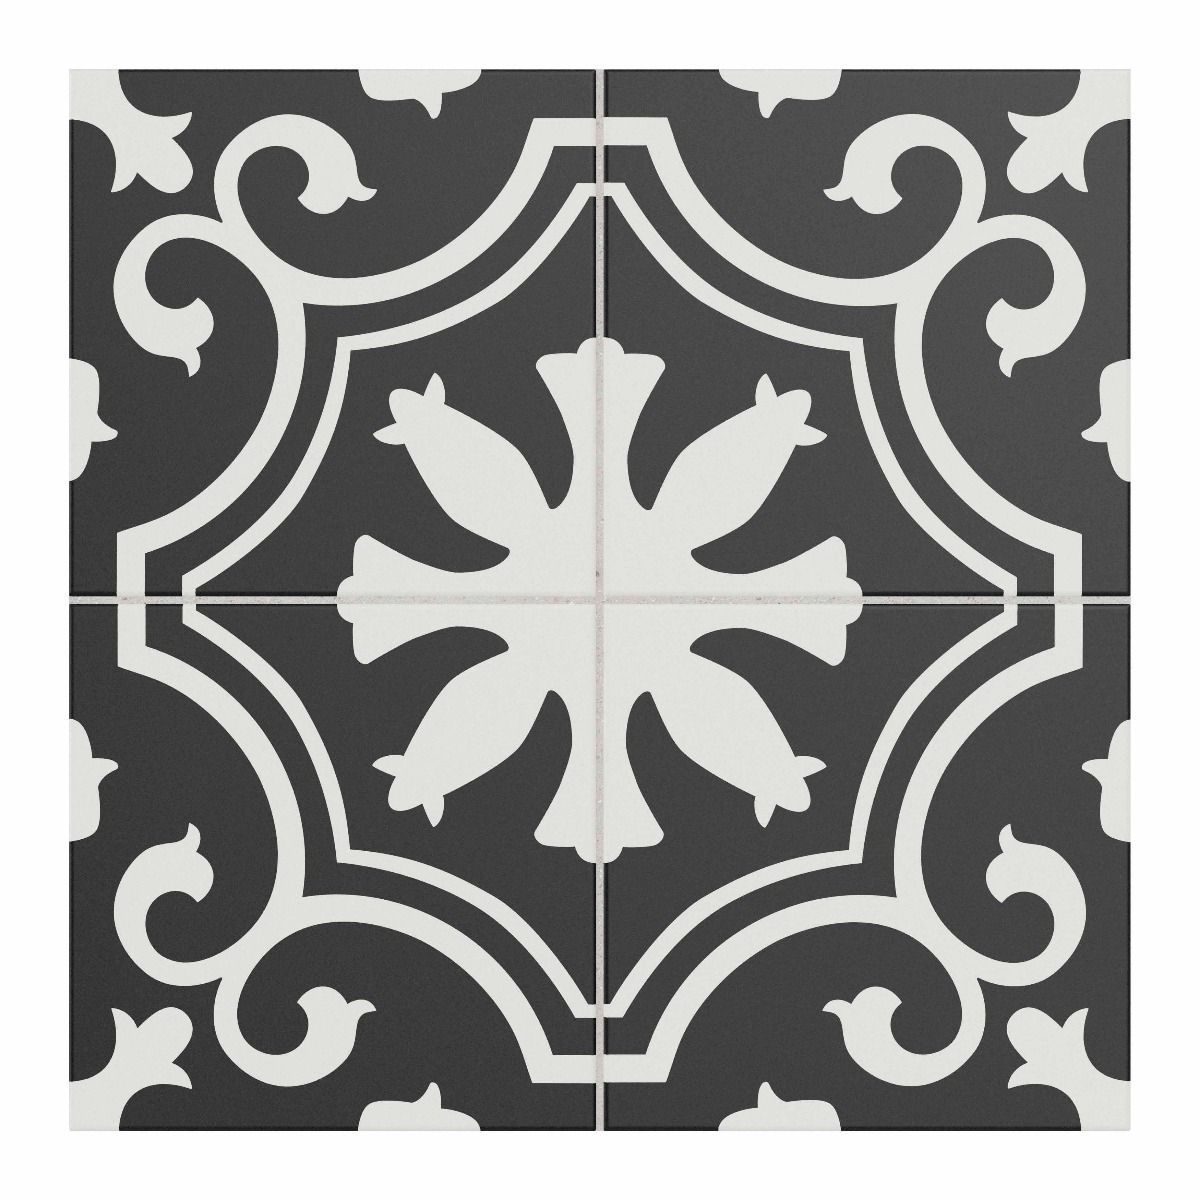 Picasso Patterned Ceramic Wall & Floor Tile 25x25cm